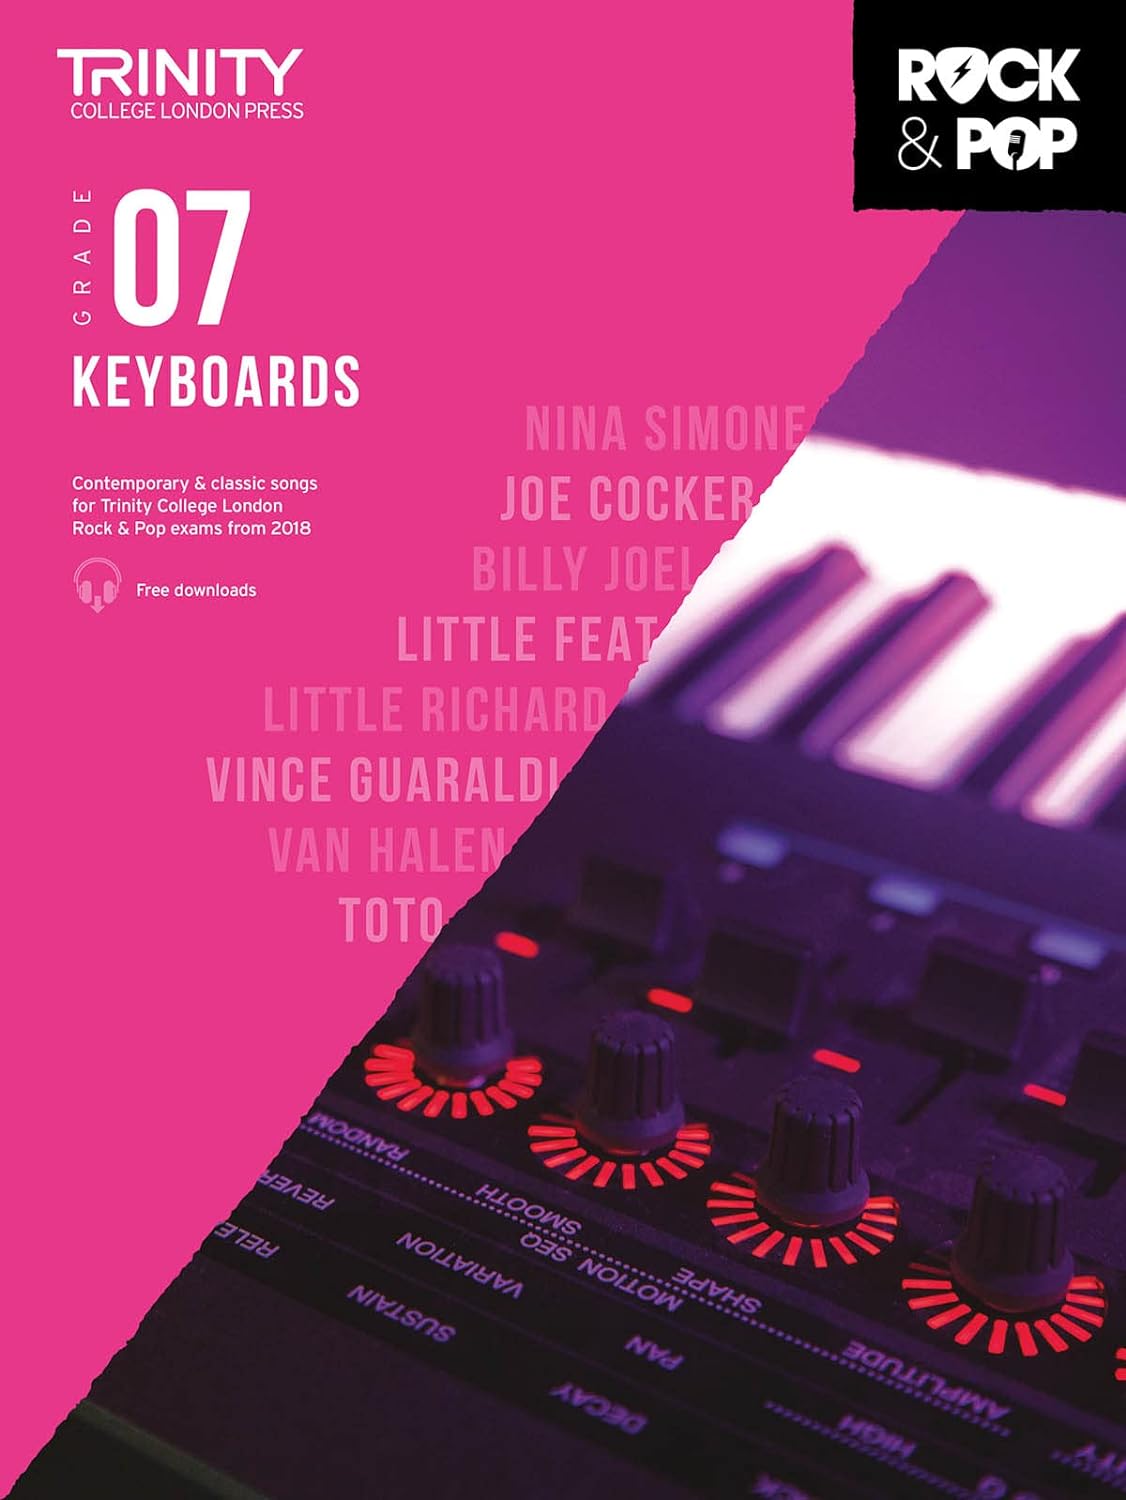 Rock & Pop Keyboards from 2018 G7 Piano Traders